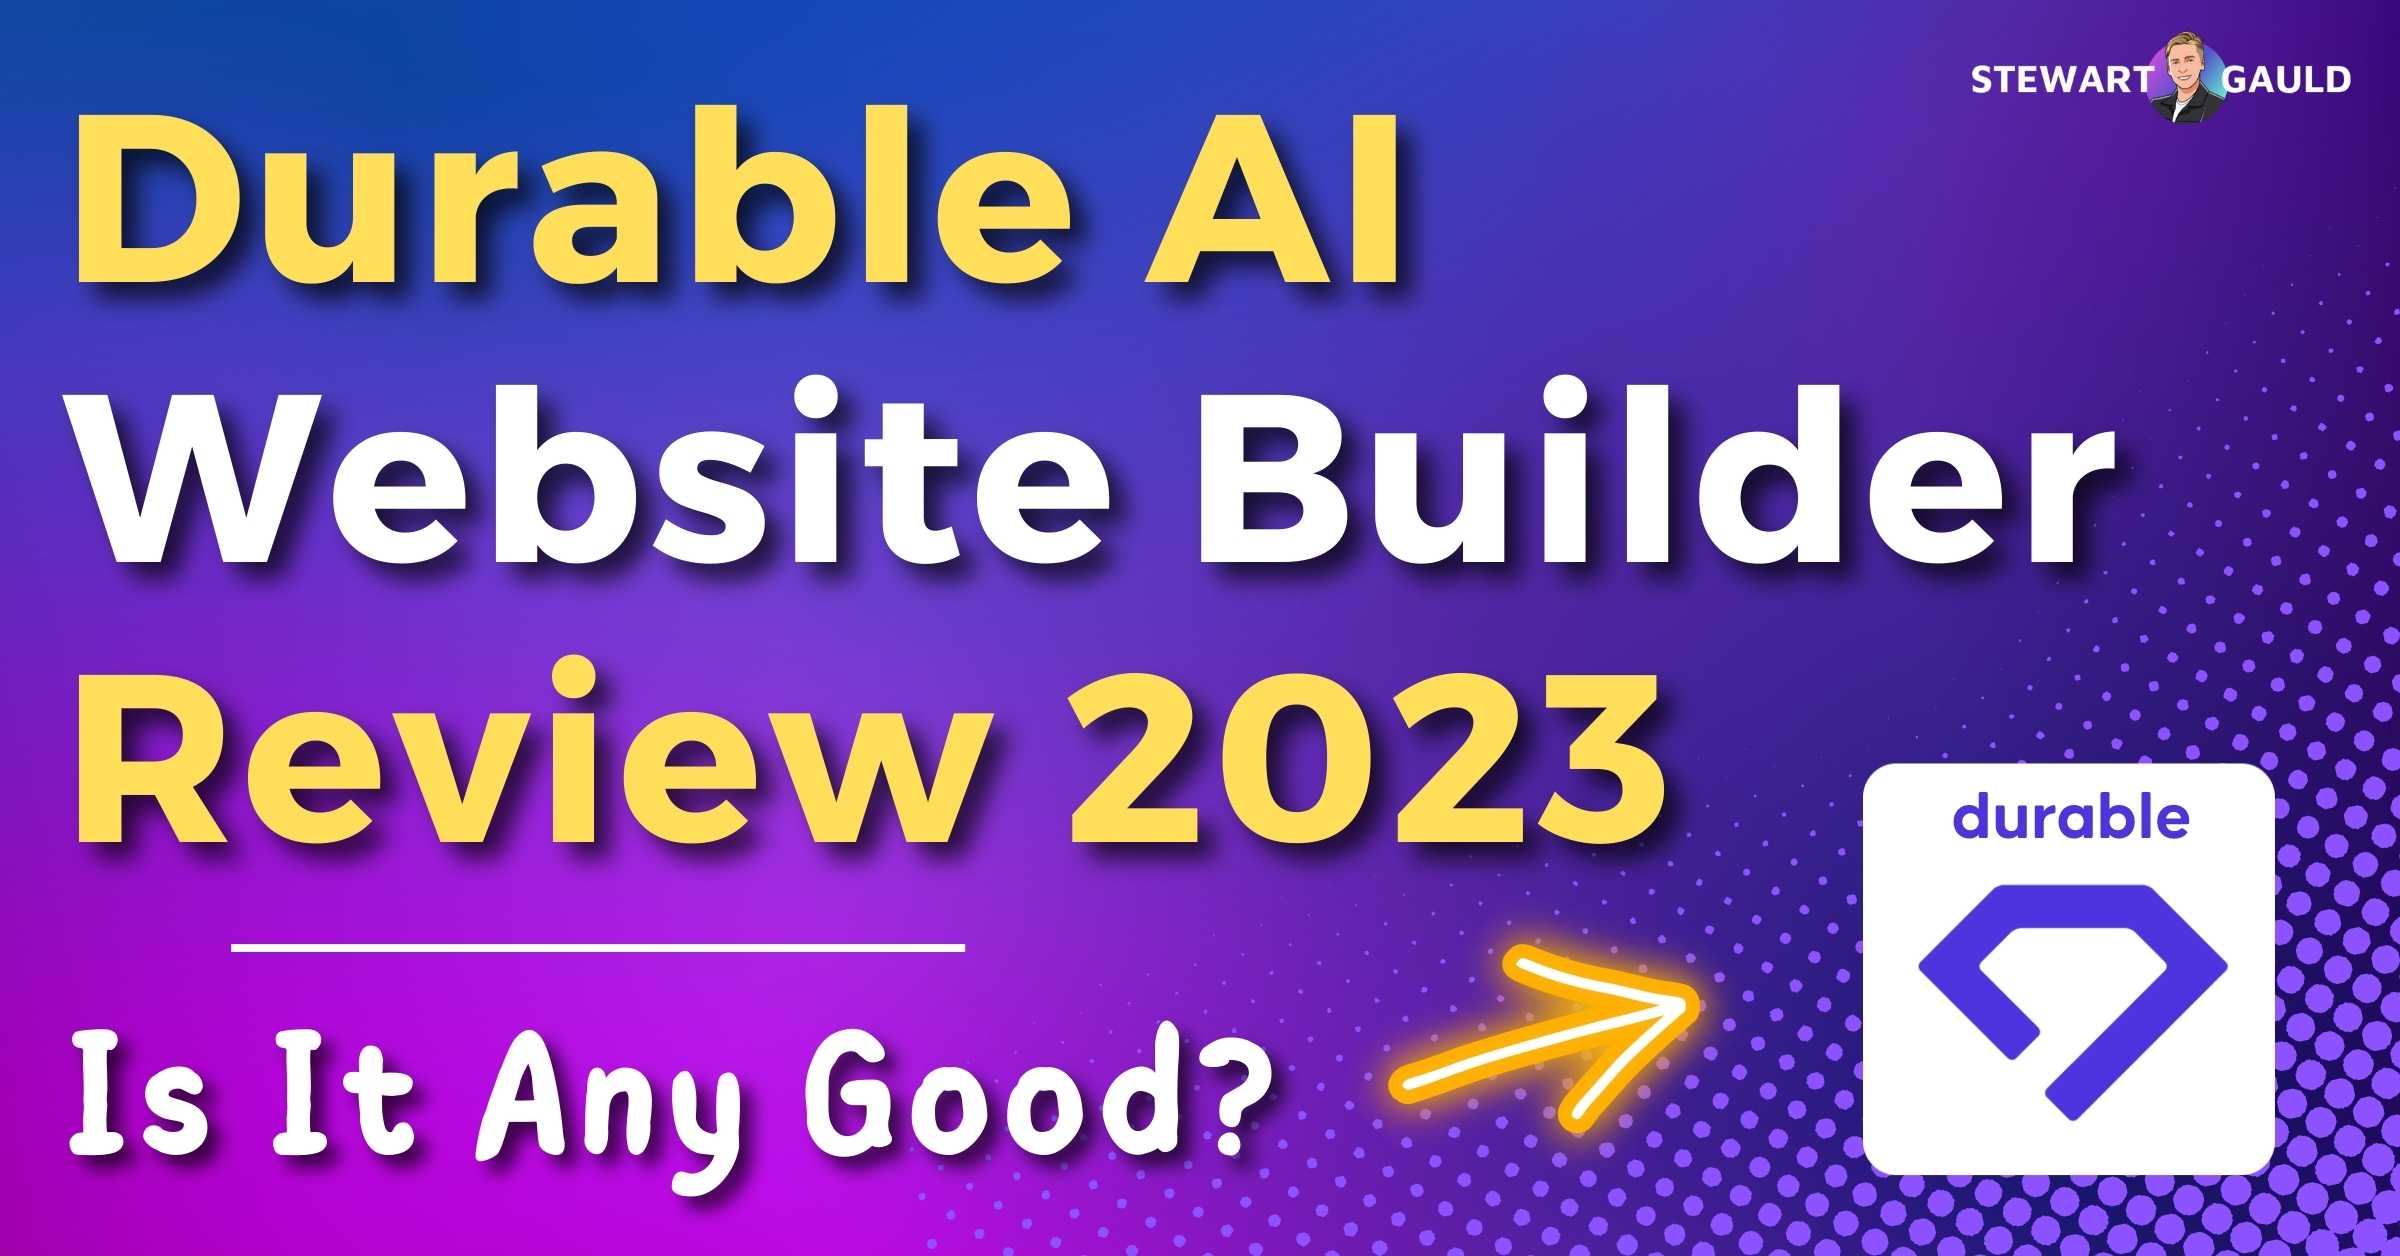 Durable AI Website Builder Review: Is It Any Good? (2023)